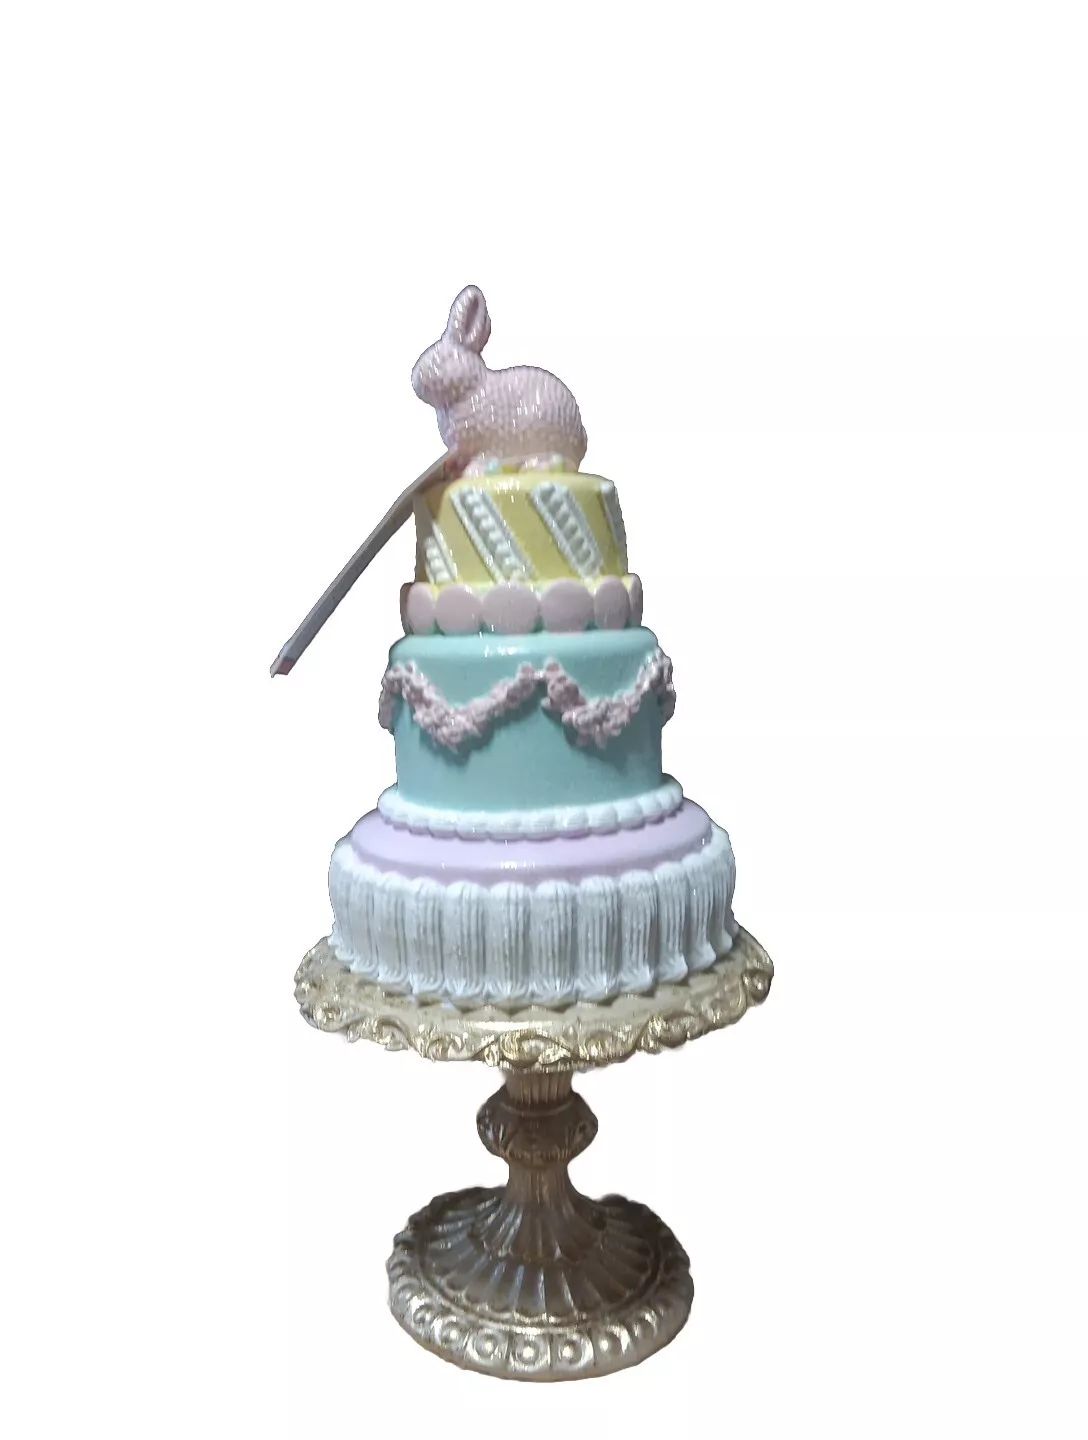 Cupcakes and Cashmere 15" Pastel Easter Bunny Flowers Pedestal Cake NWT  | eBay | eBay US